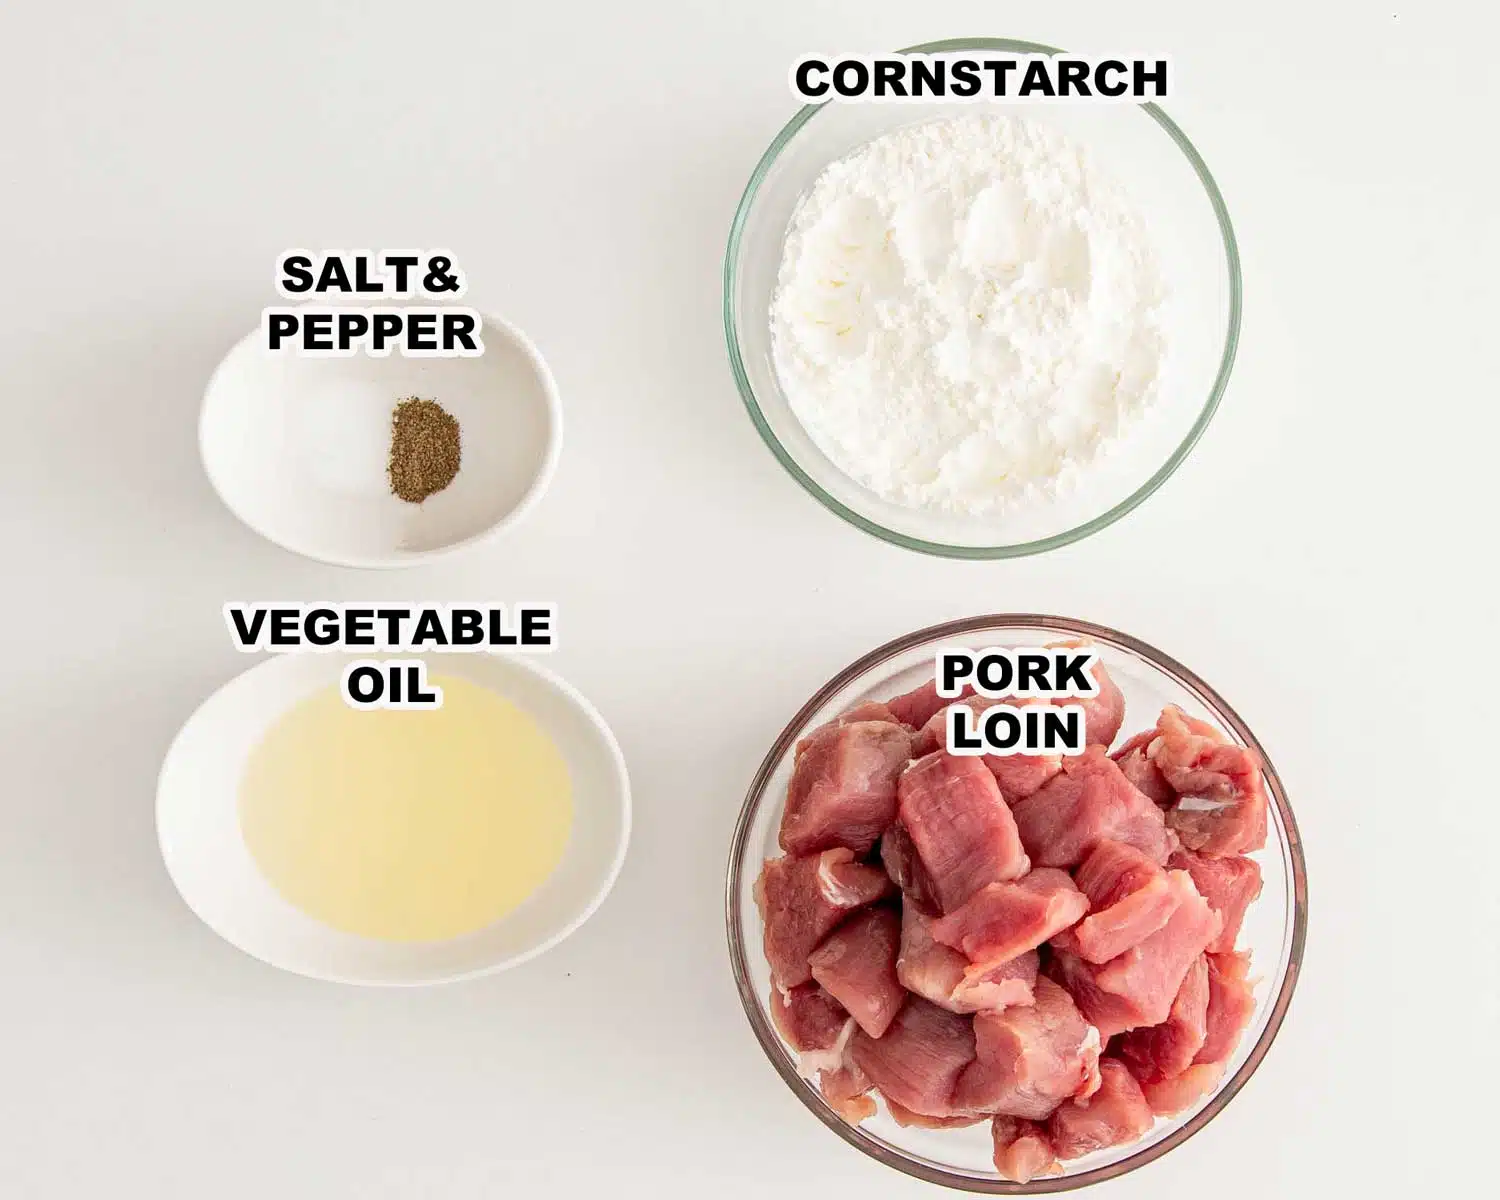 ingredients needed to make sweet and sour pork.